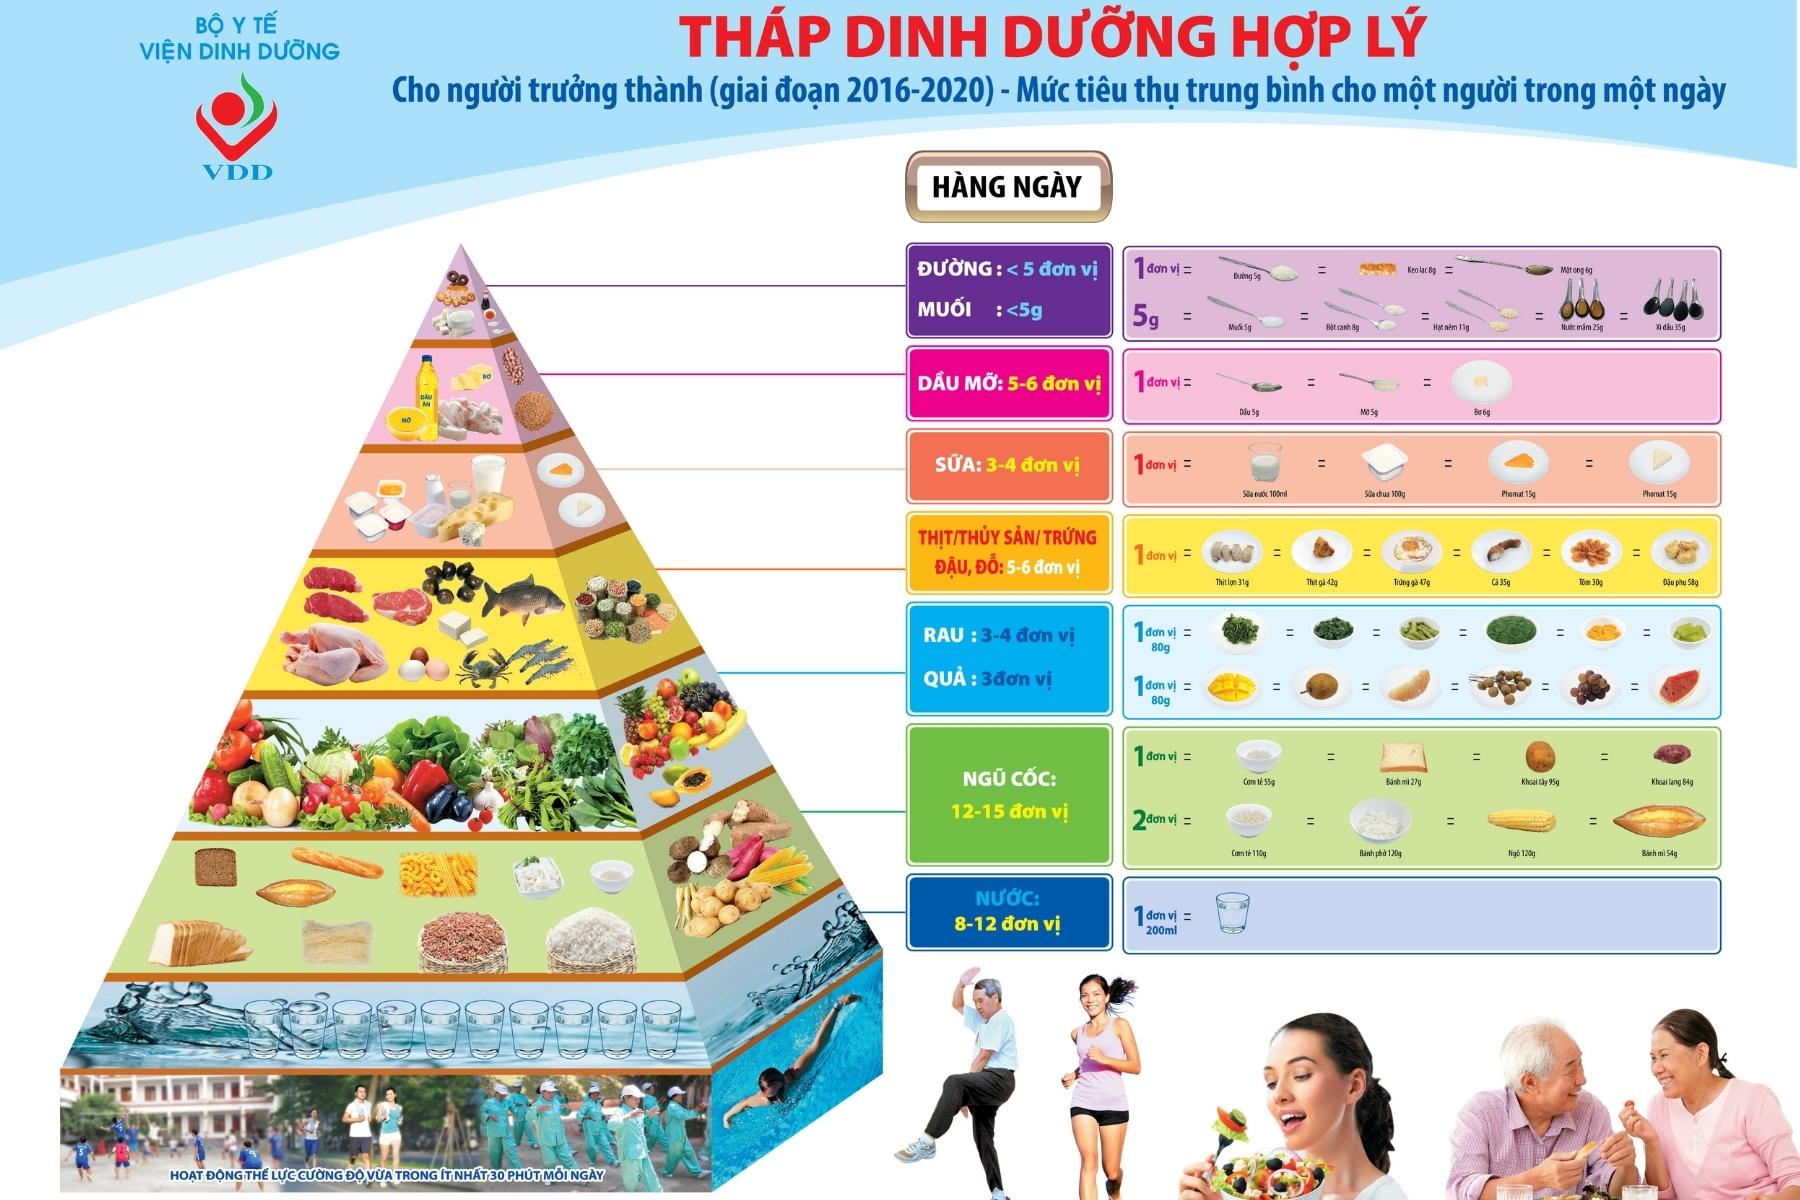 Thap dinh duong cho nguoi truong thanh